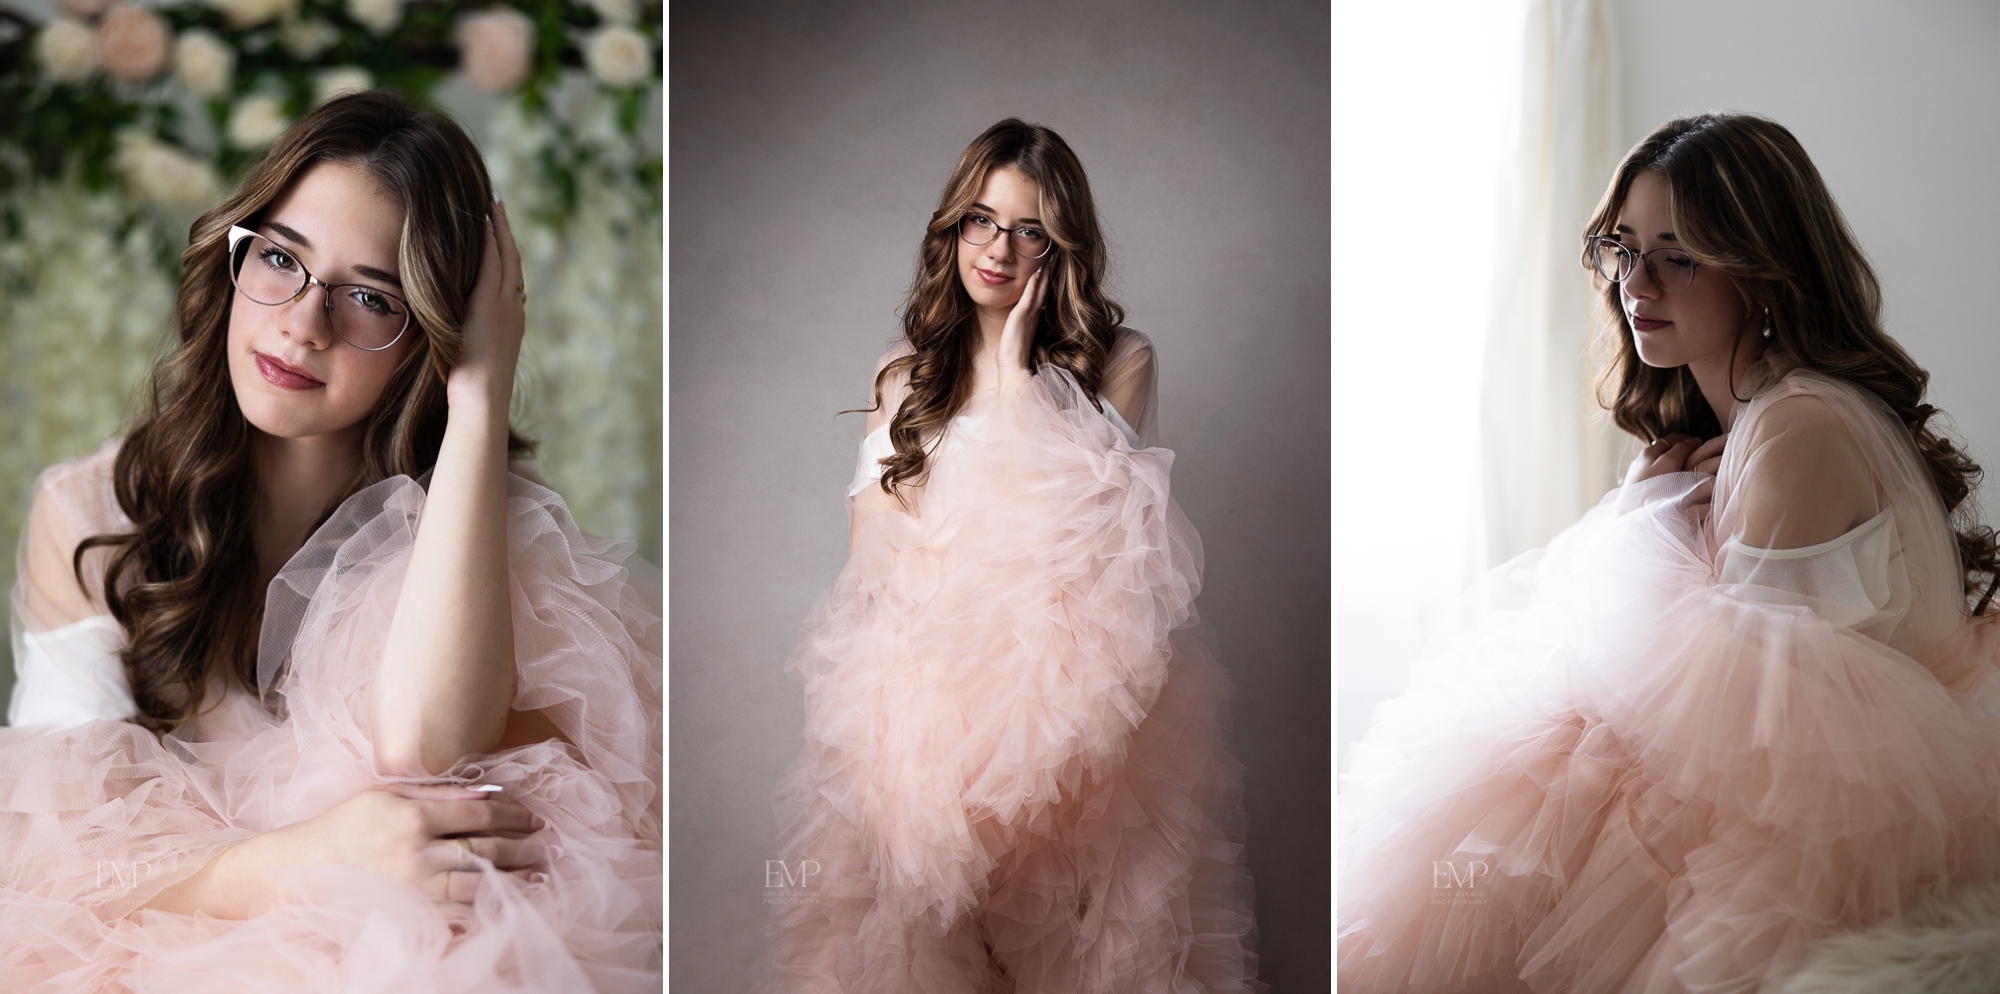 High school senior girl in pink frilly gown